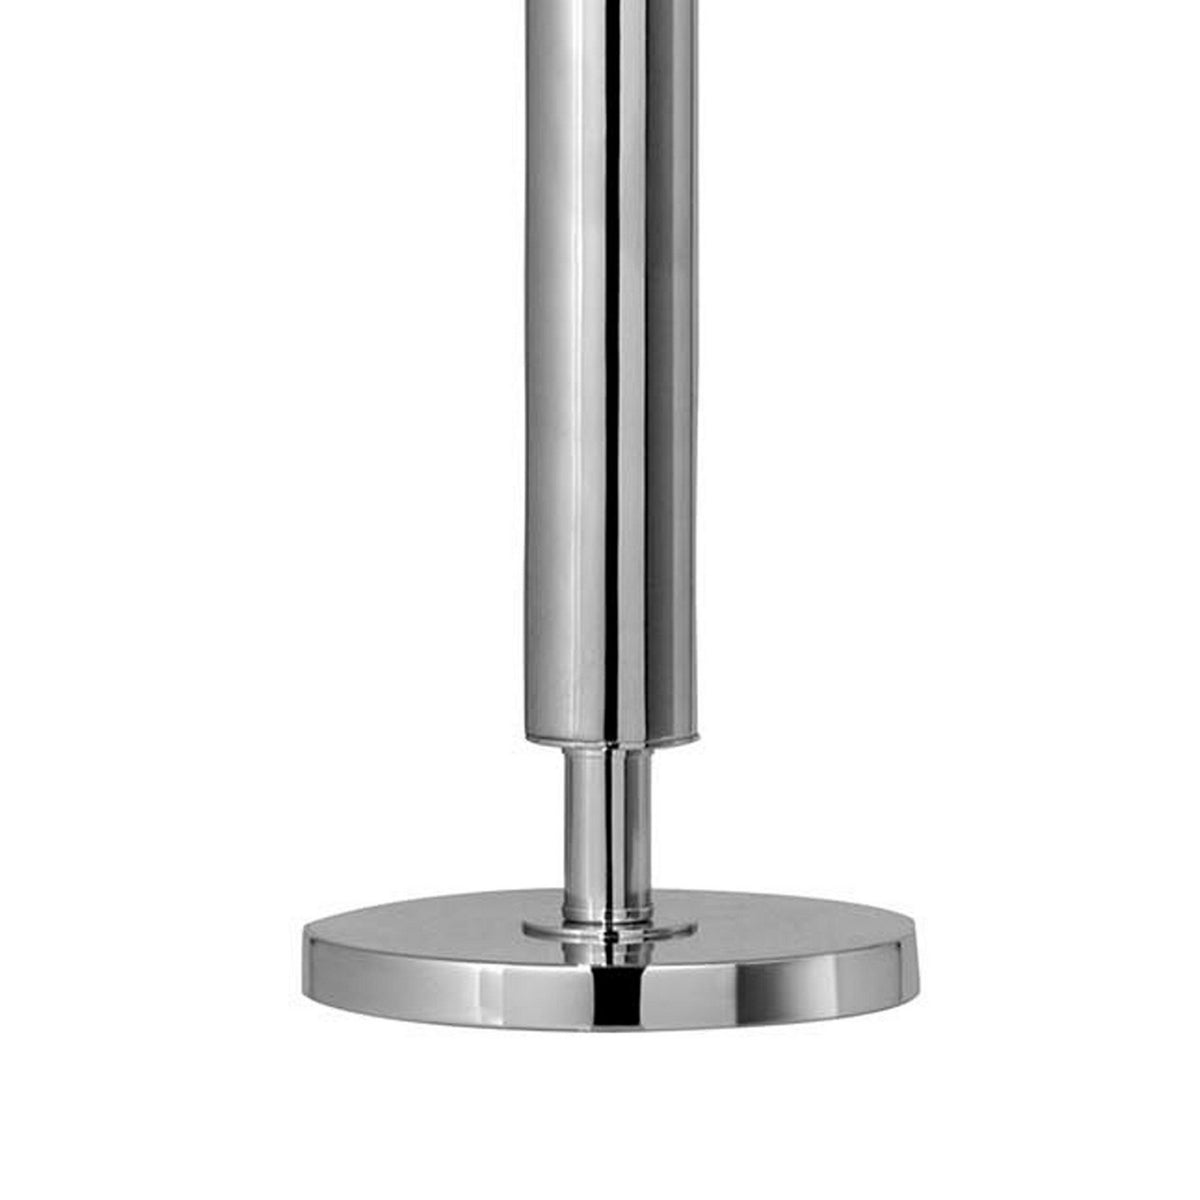 Metal Table Lamp with Tubular Support and Push Through Switch, Silver - BM220723